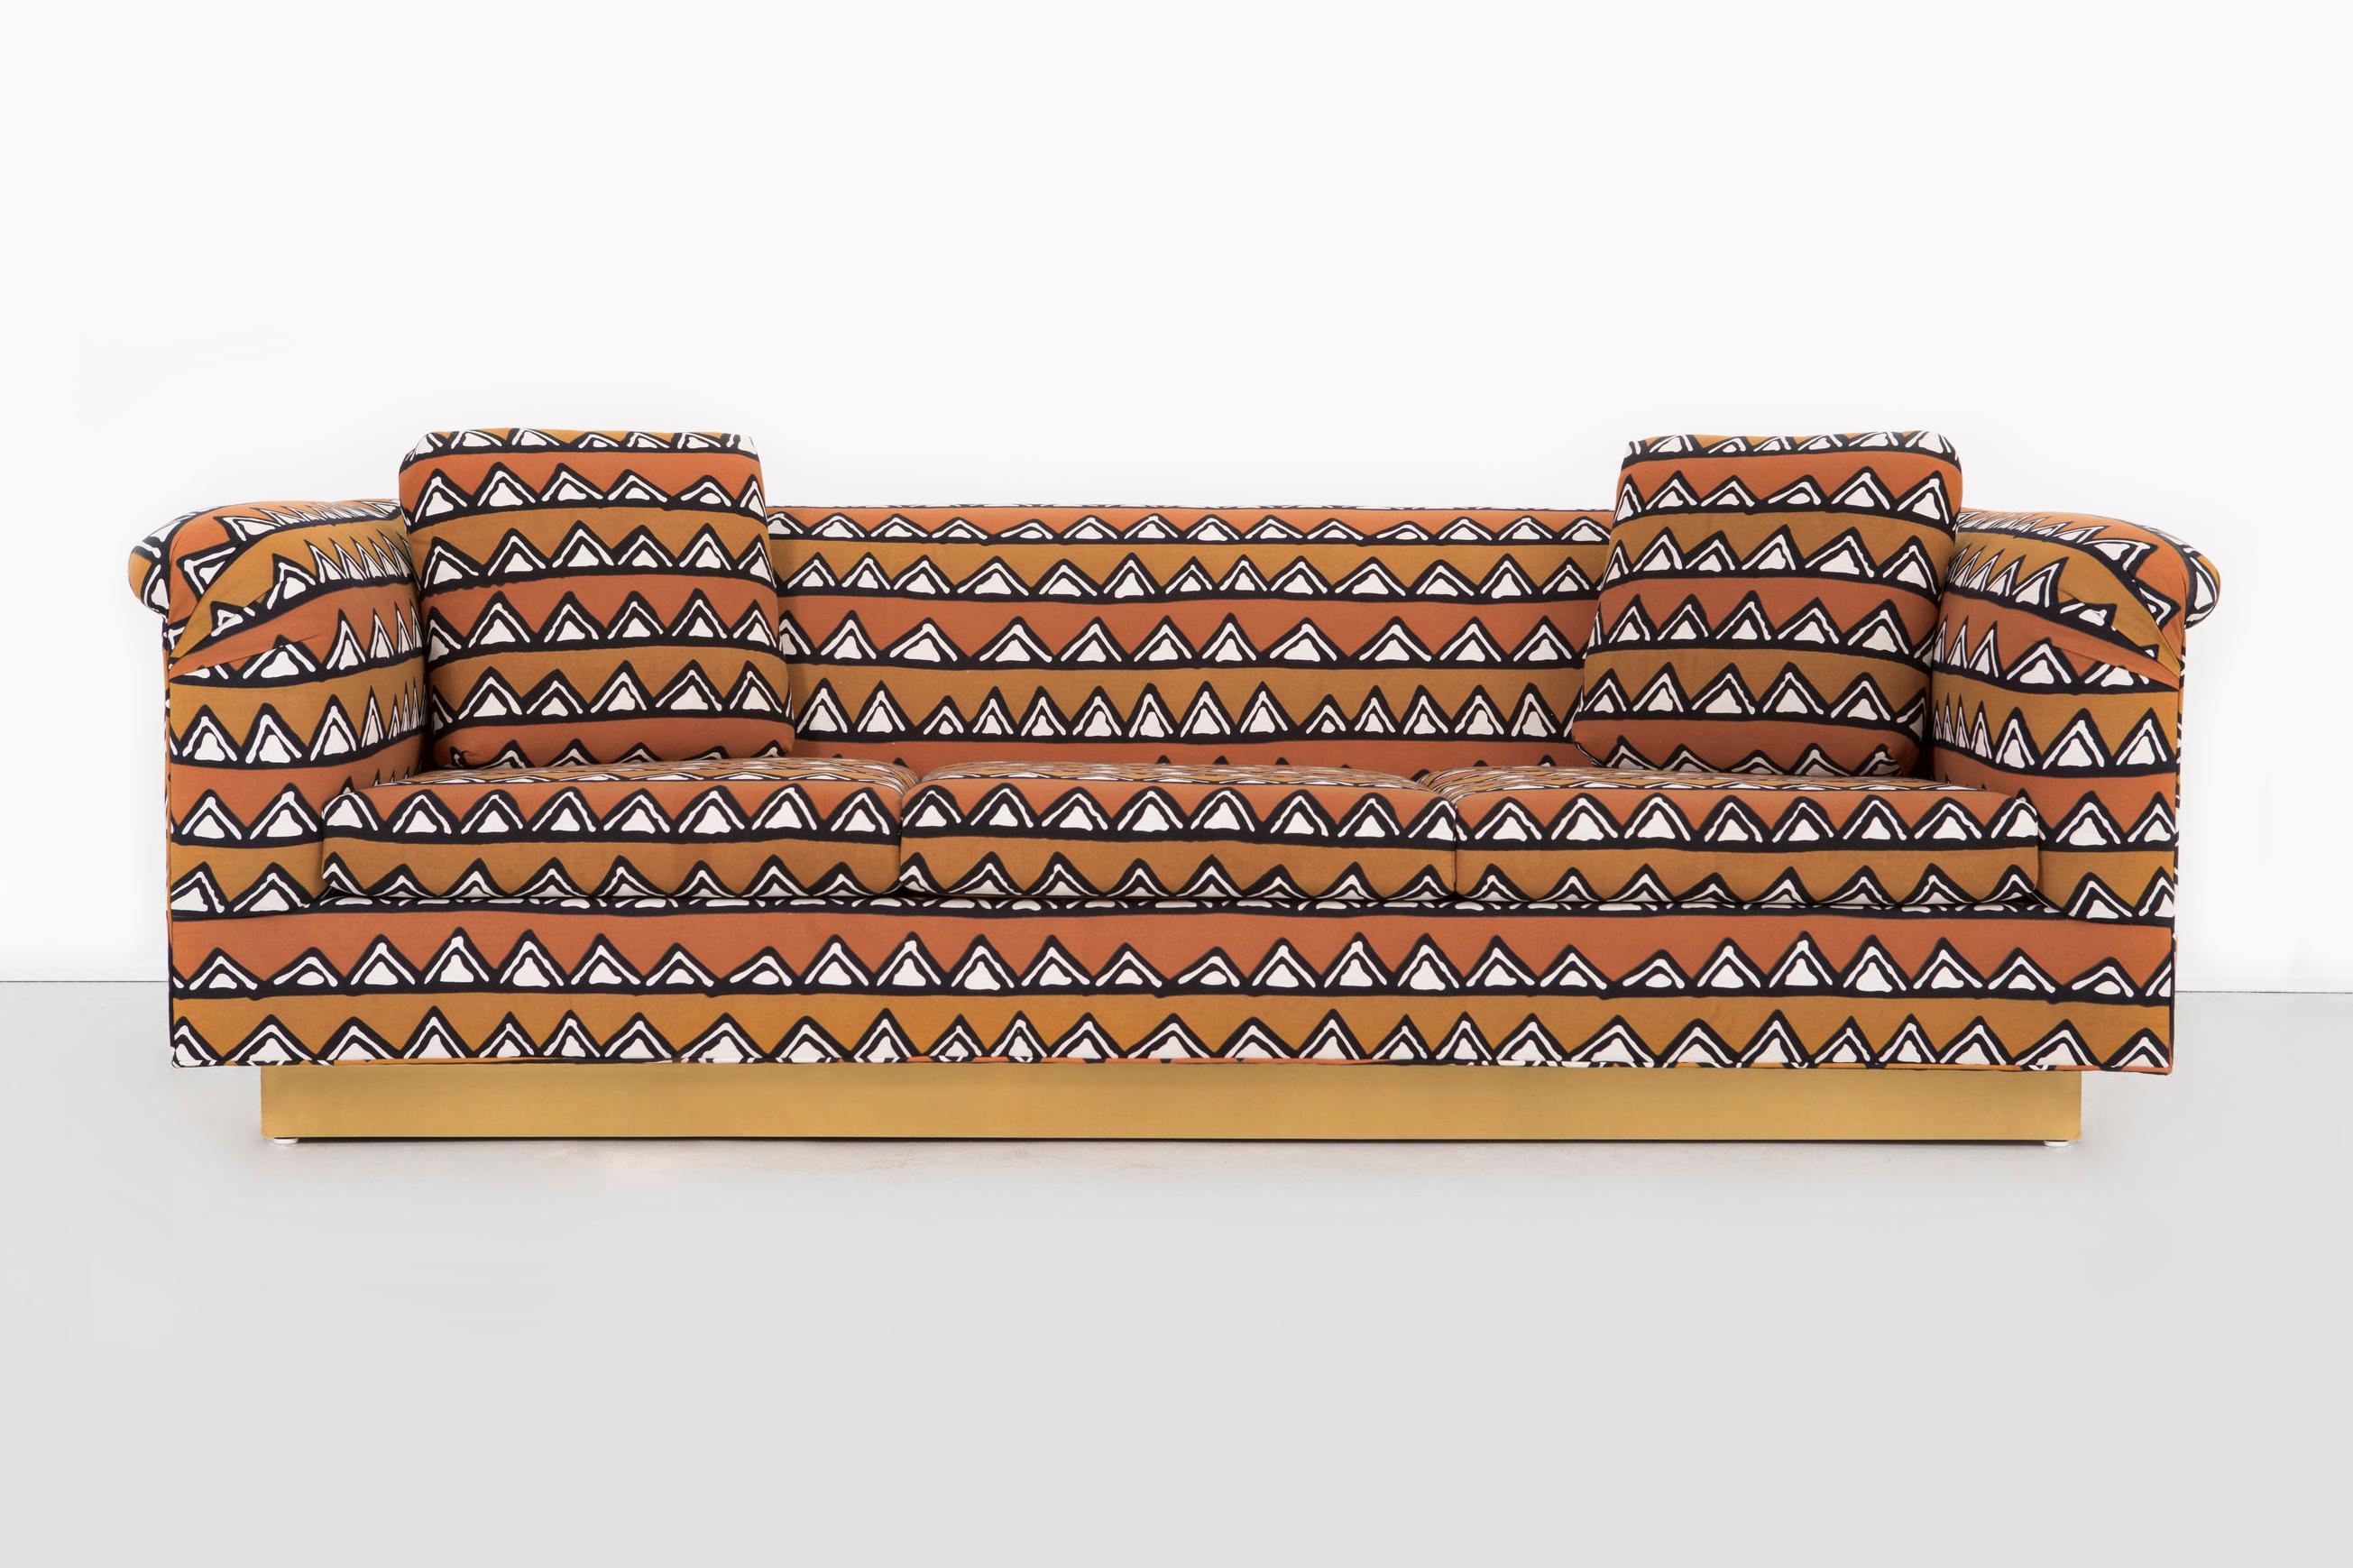 Sofa

Designed by Richard Himmel

USA, circa 1960s

Newly reupholstered in mud cloth from Zimbabwe with a brass base

Measures: 28” H x 90 ½” W x 35” D x seat 16 ½” H

Pictured with live edge coffee table by Jerry L Smuck (sold). 

Fabric sample